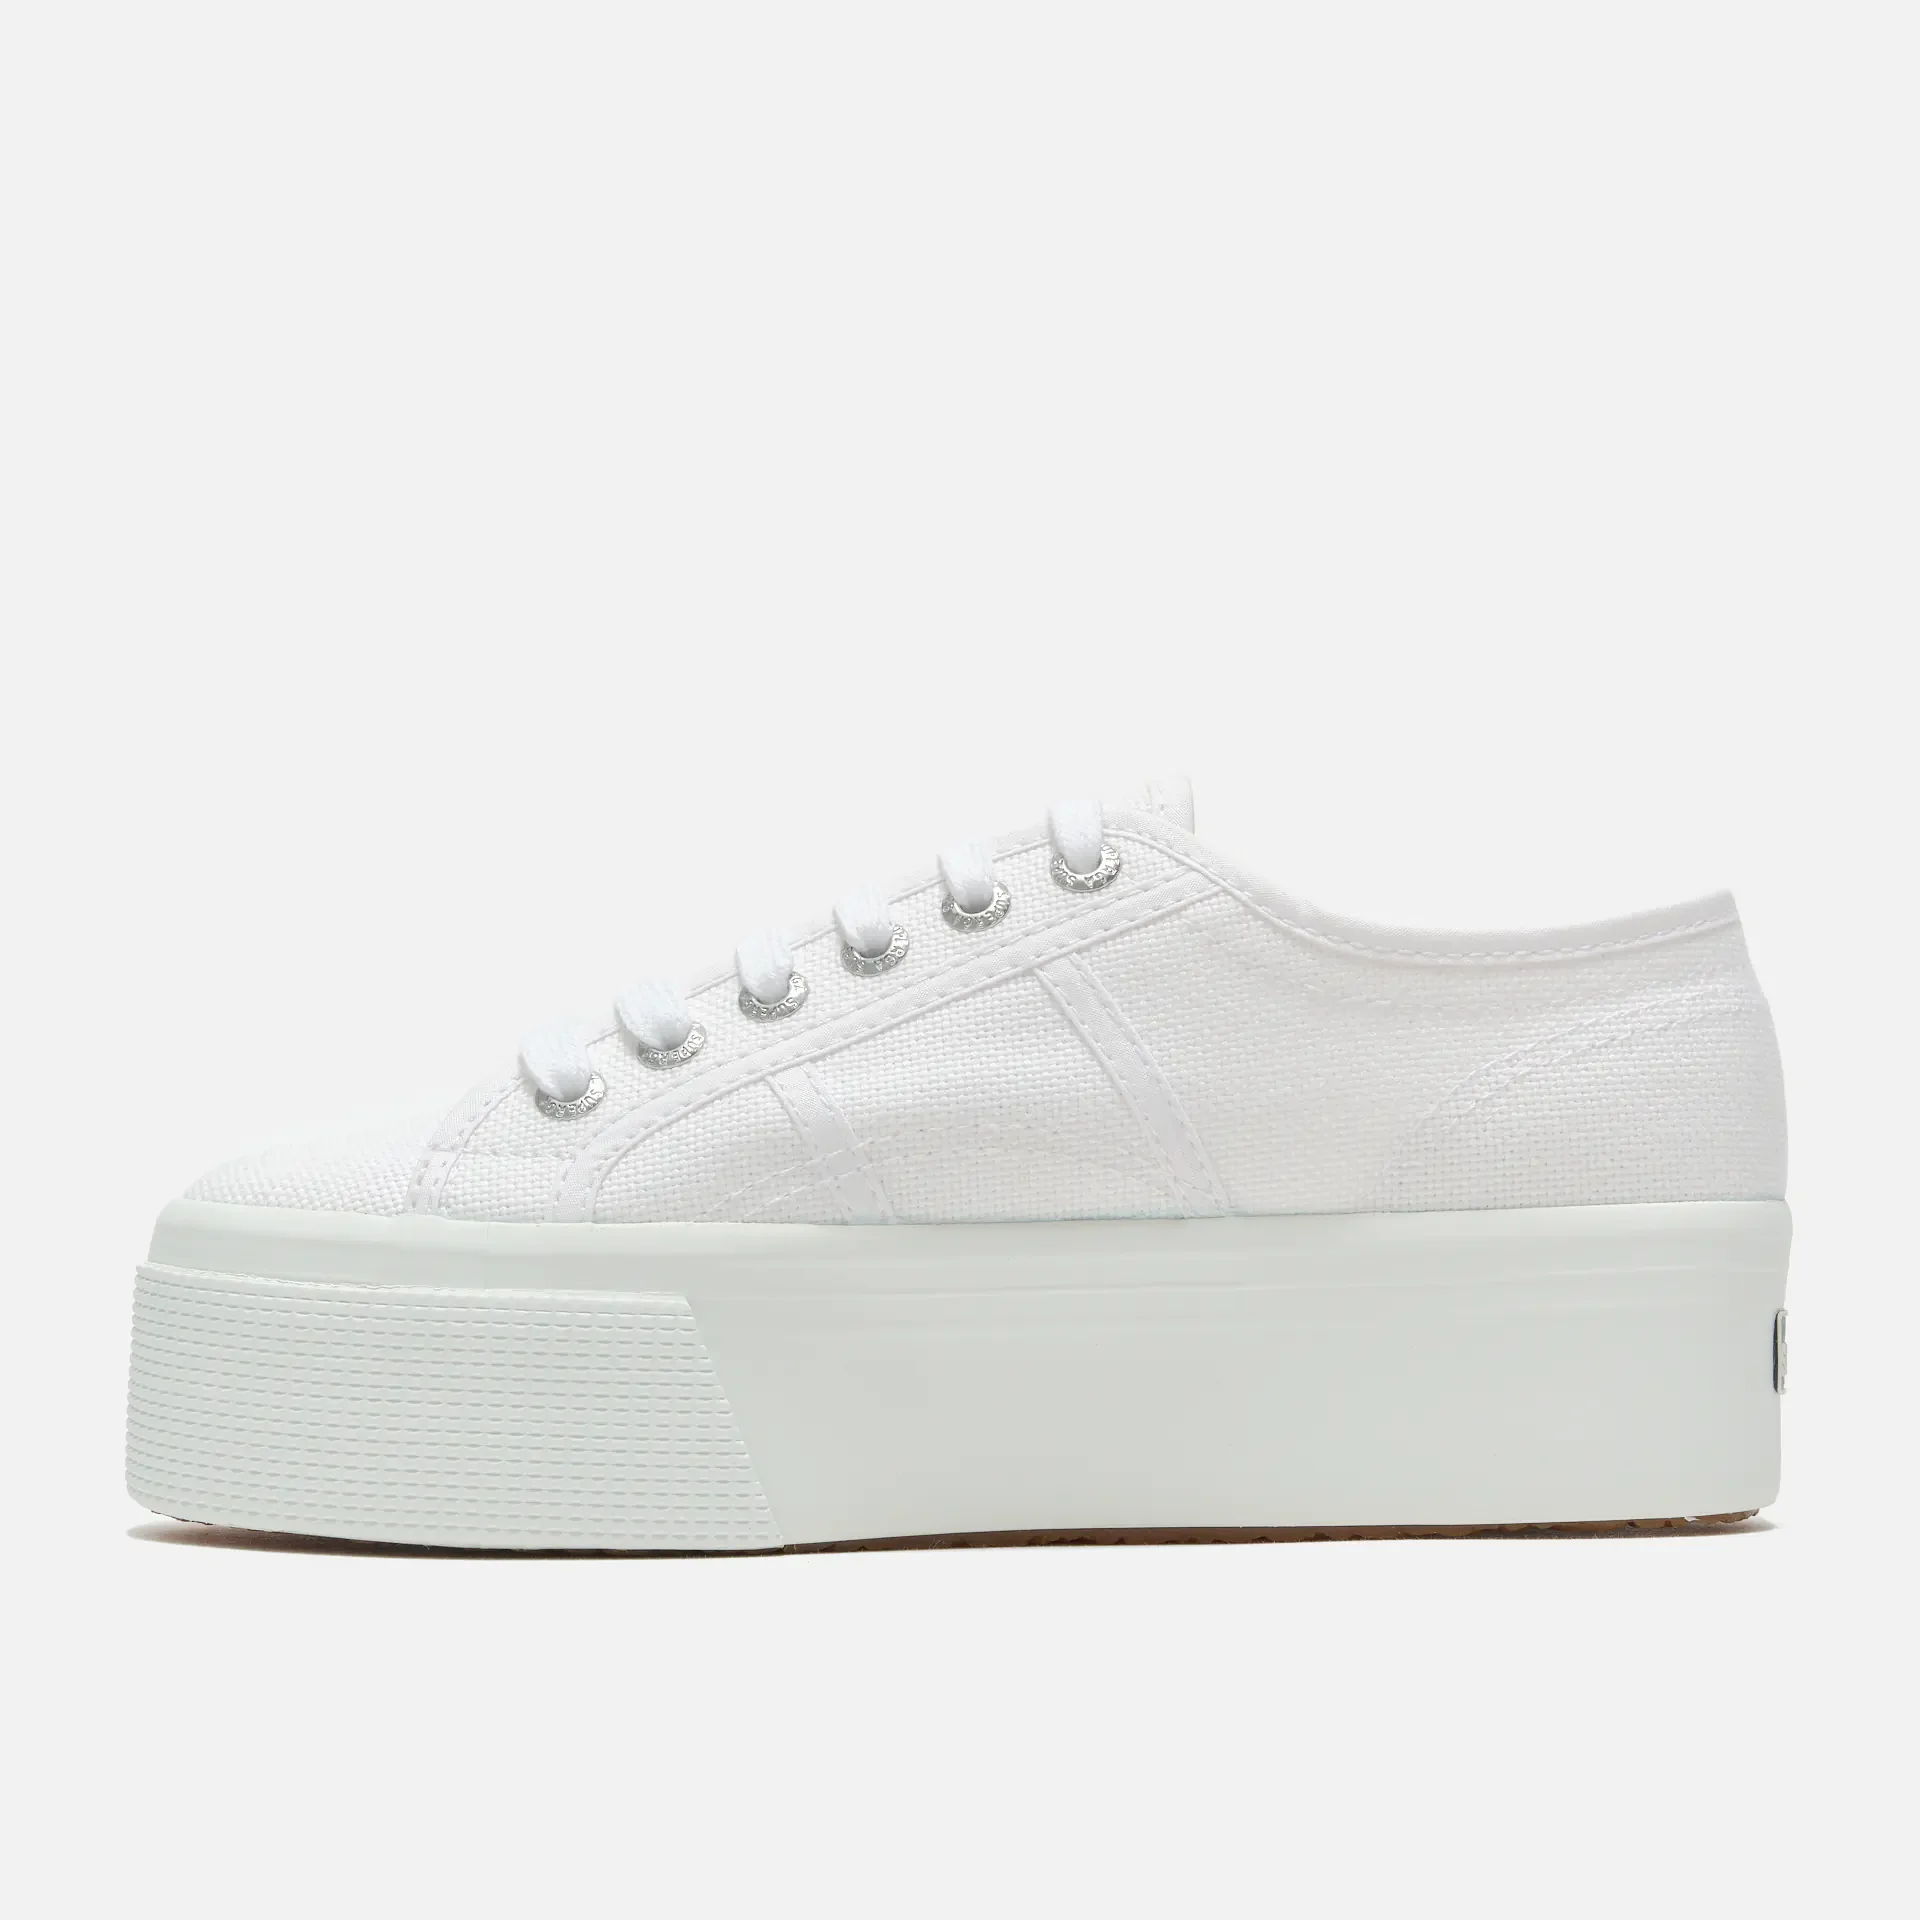 Superga 2790 Cotu Linea Up And Down Sneaker White